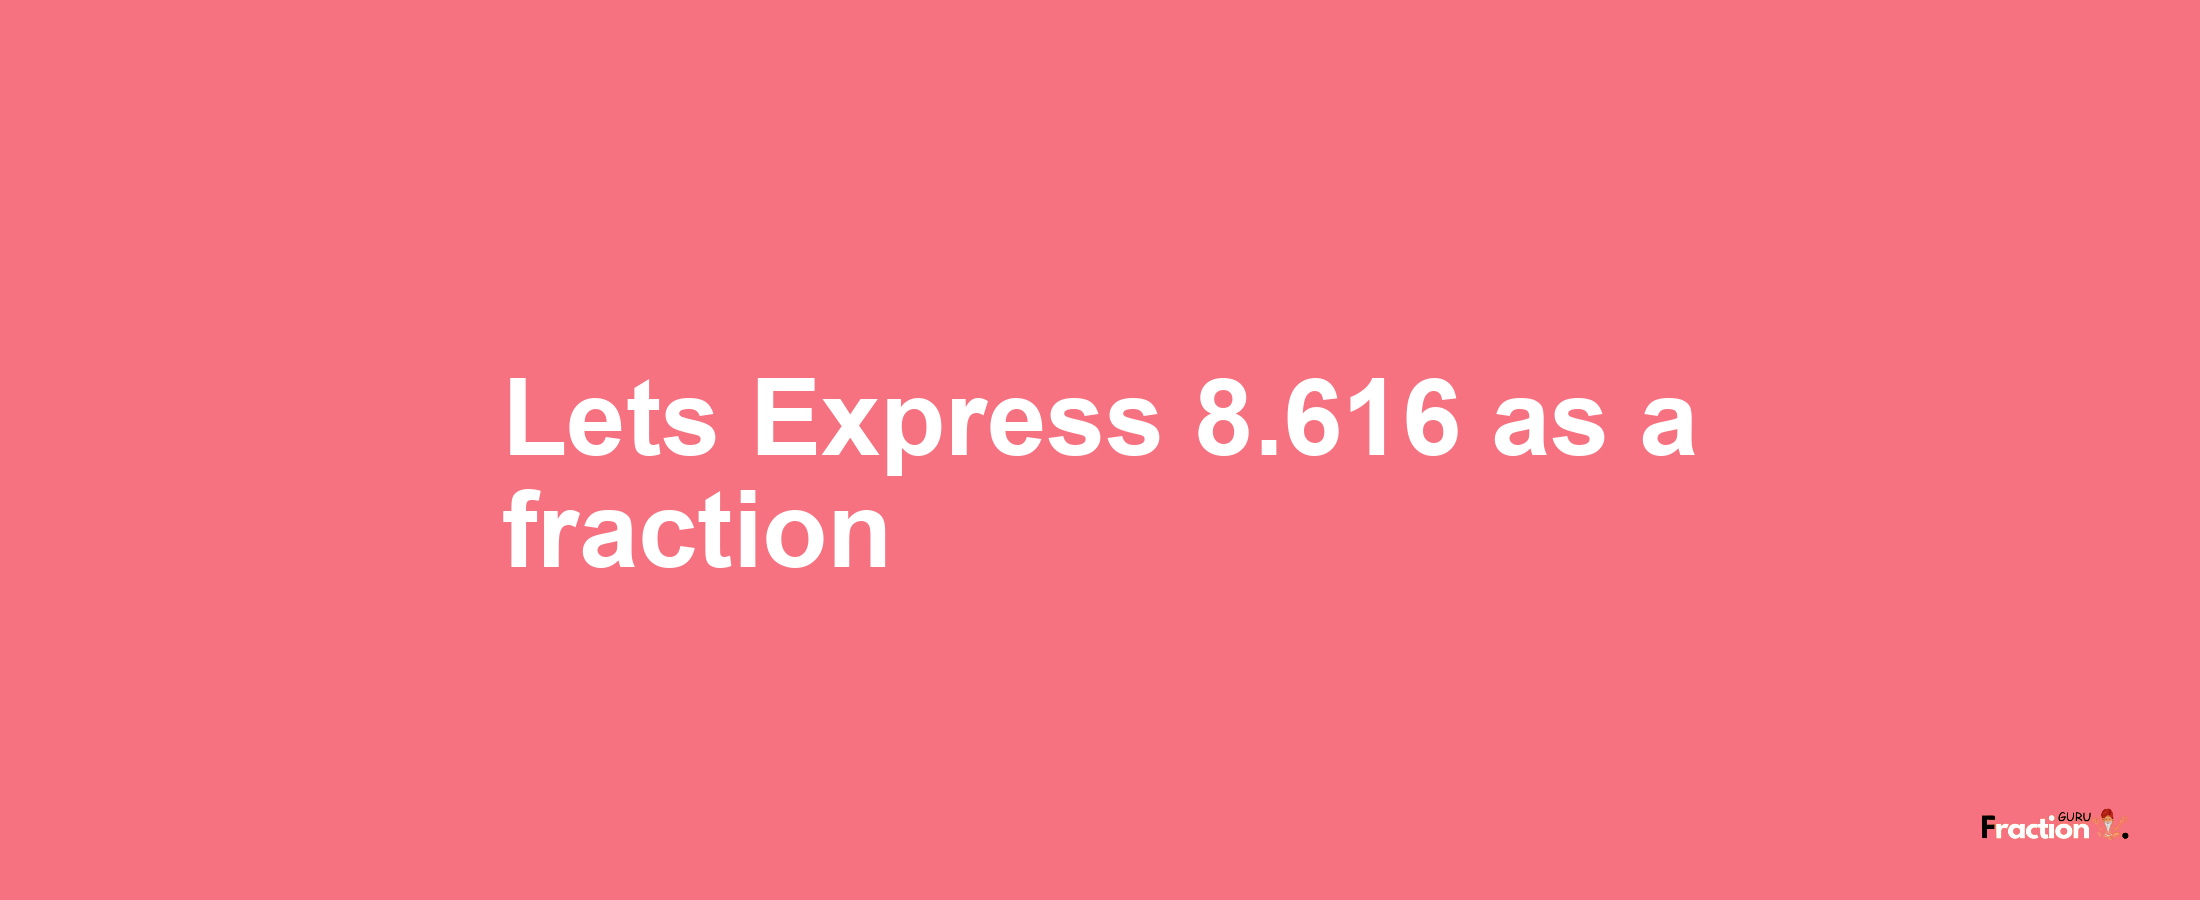 Lets Express 8.616 as afraction